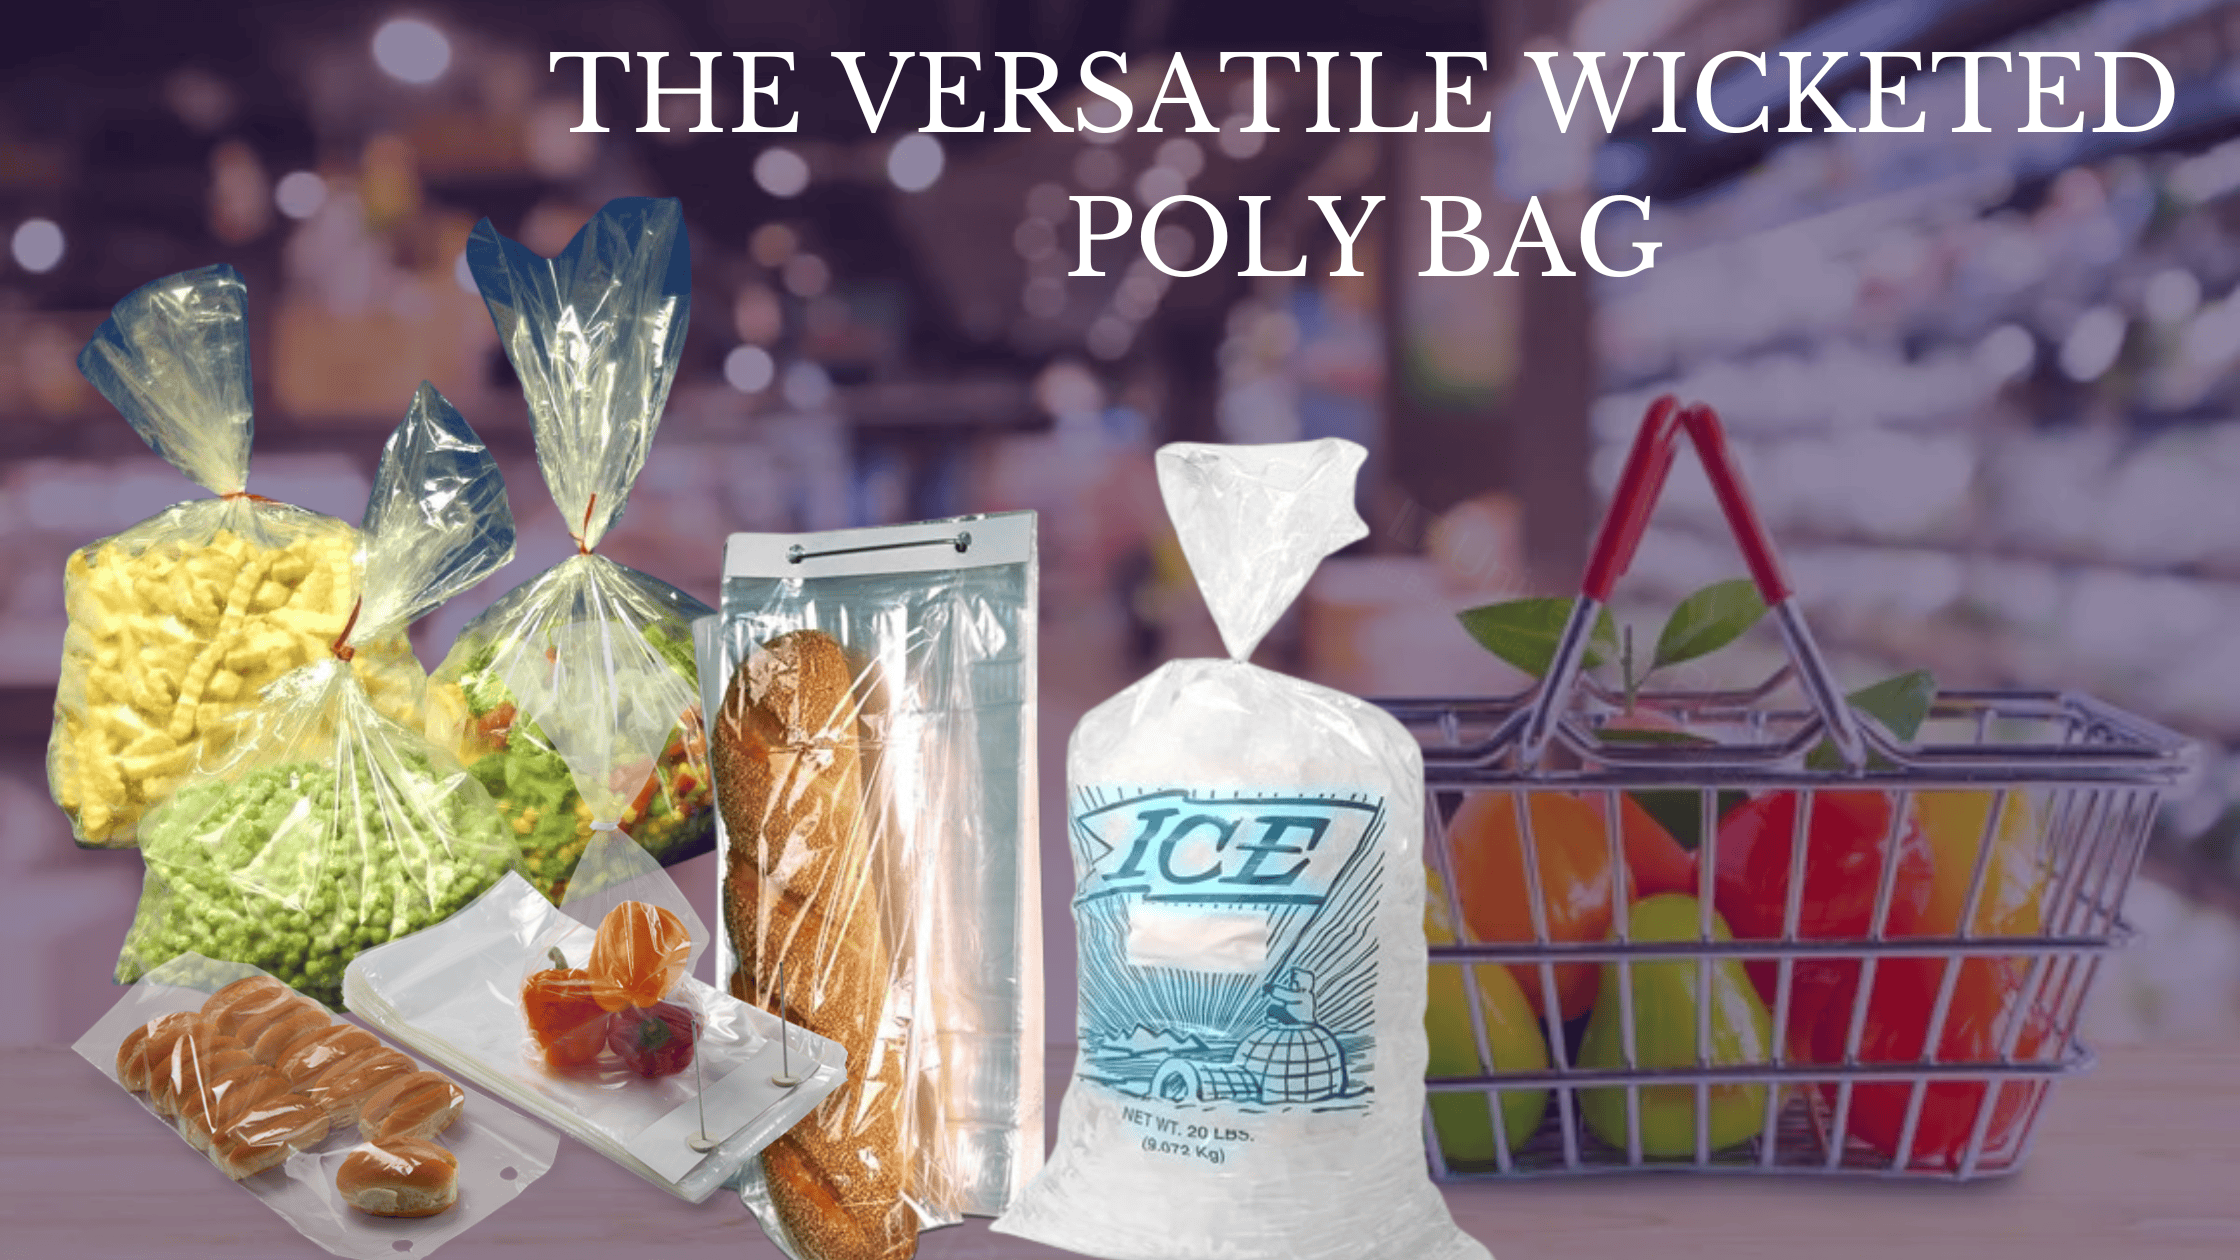 What Makes Wicketed Bags a Top Choice for Packaging?